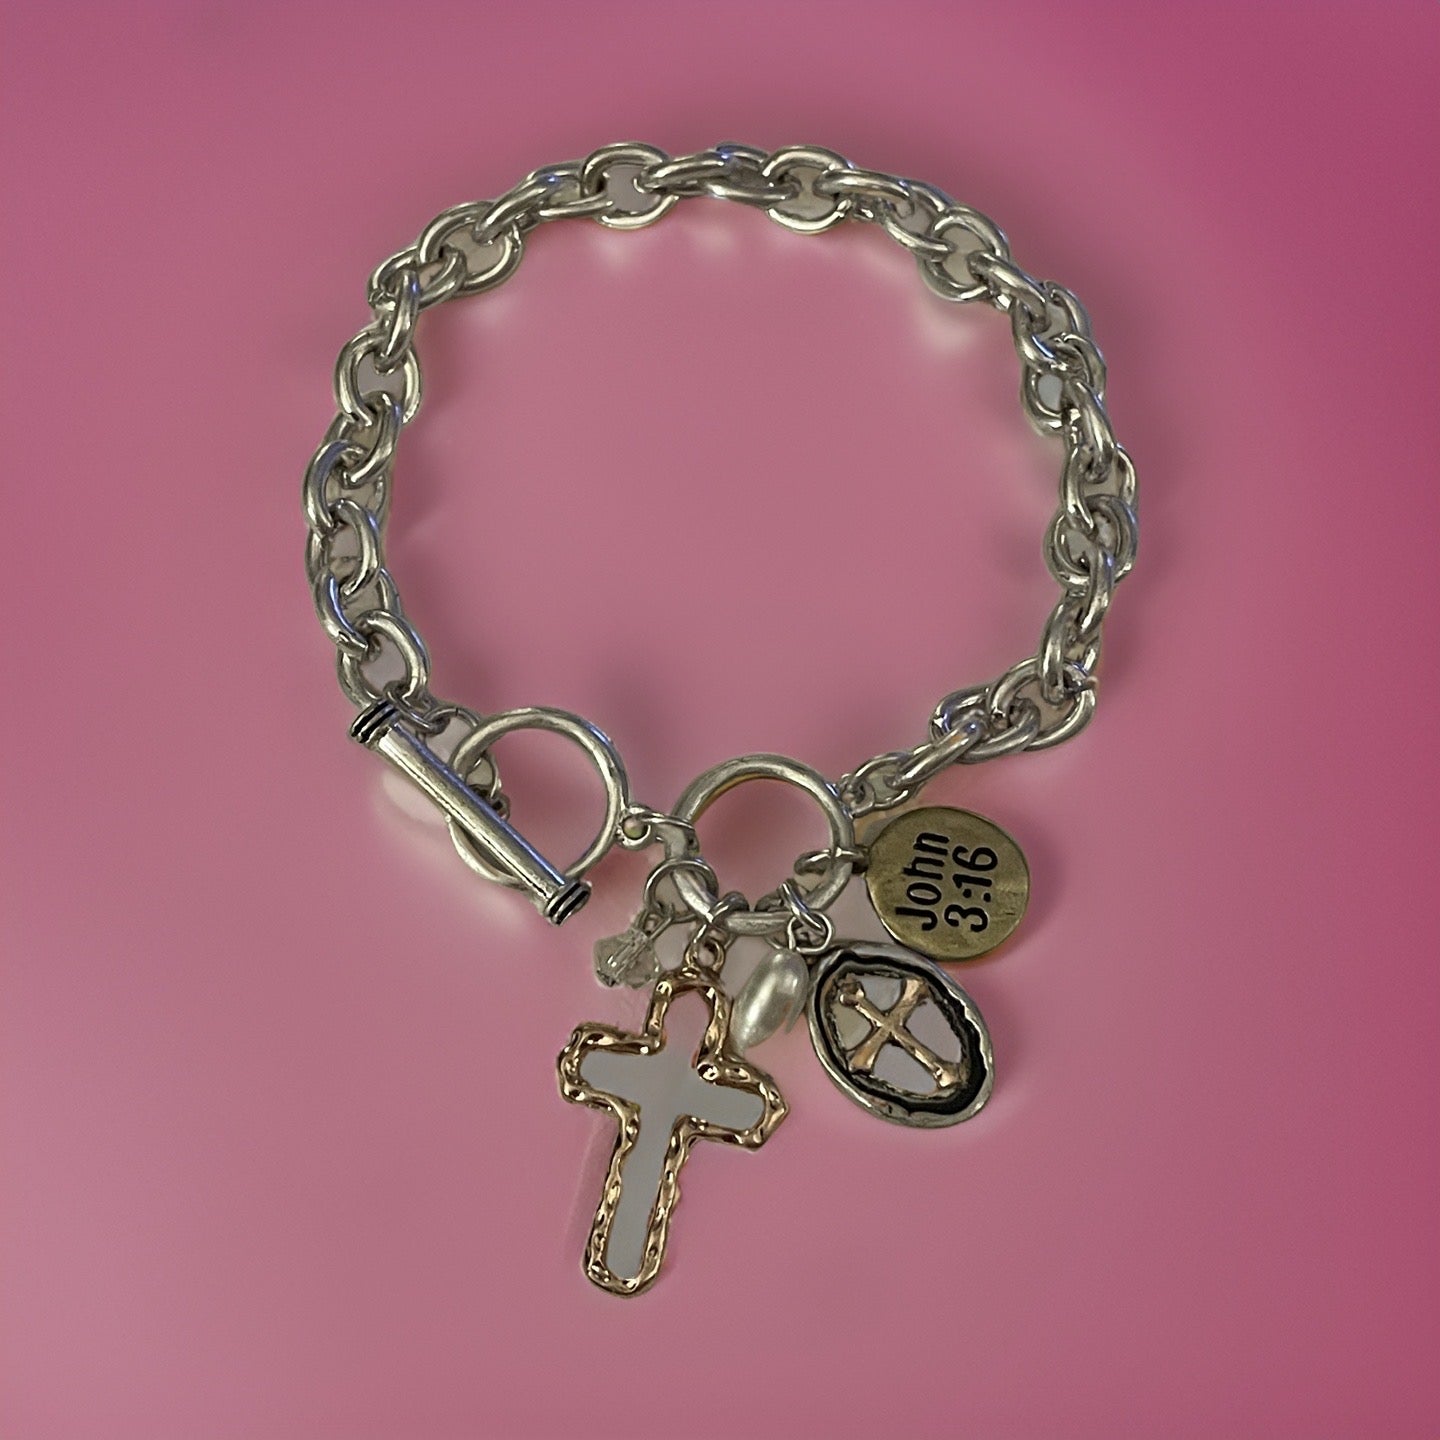 Multi-Color Cross and JOHN 3:16 Charms Toggle Clasp Bracelet - available in 2 colors